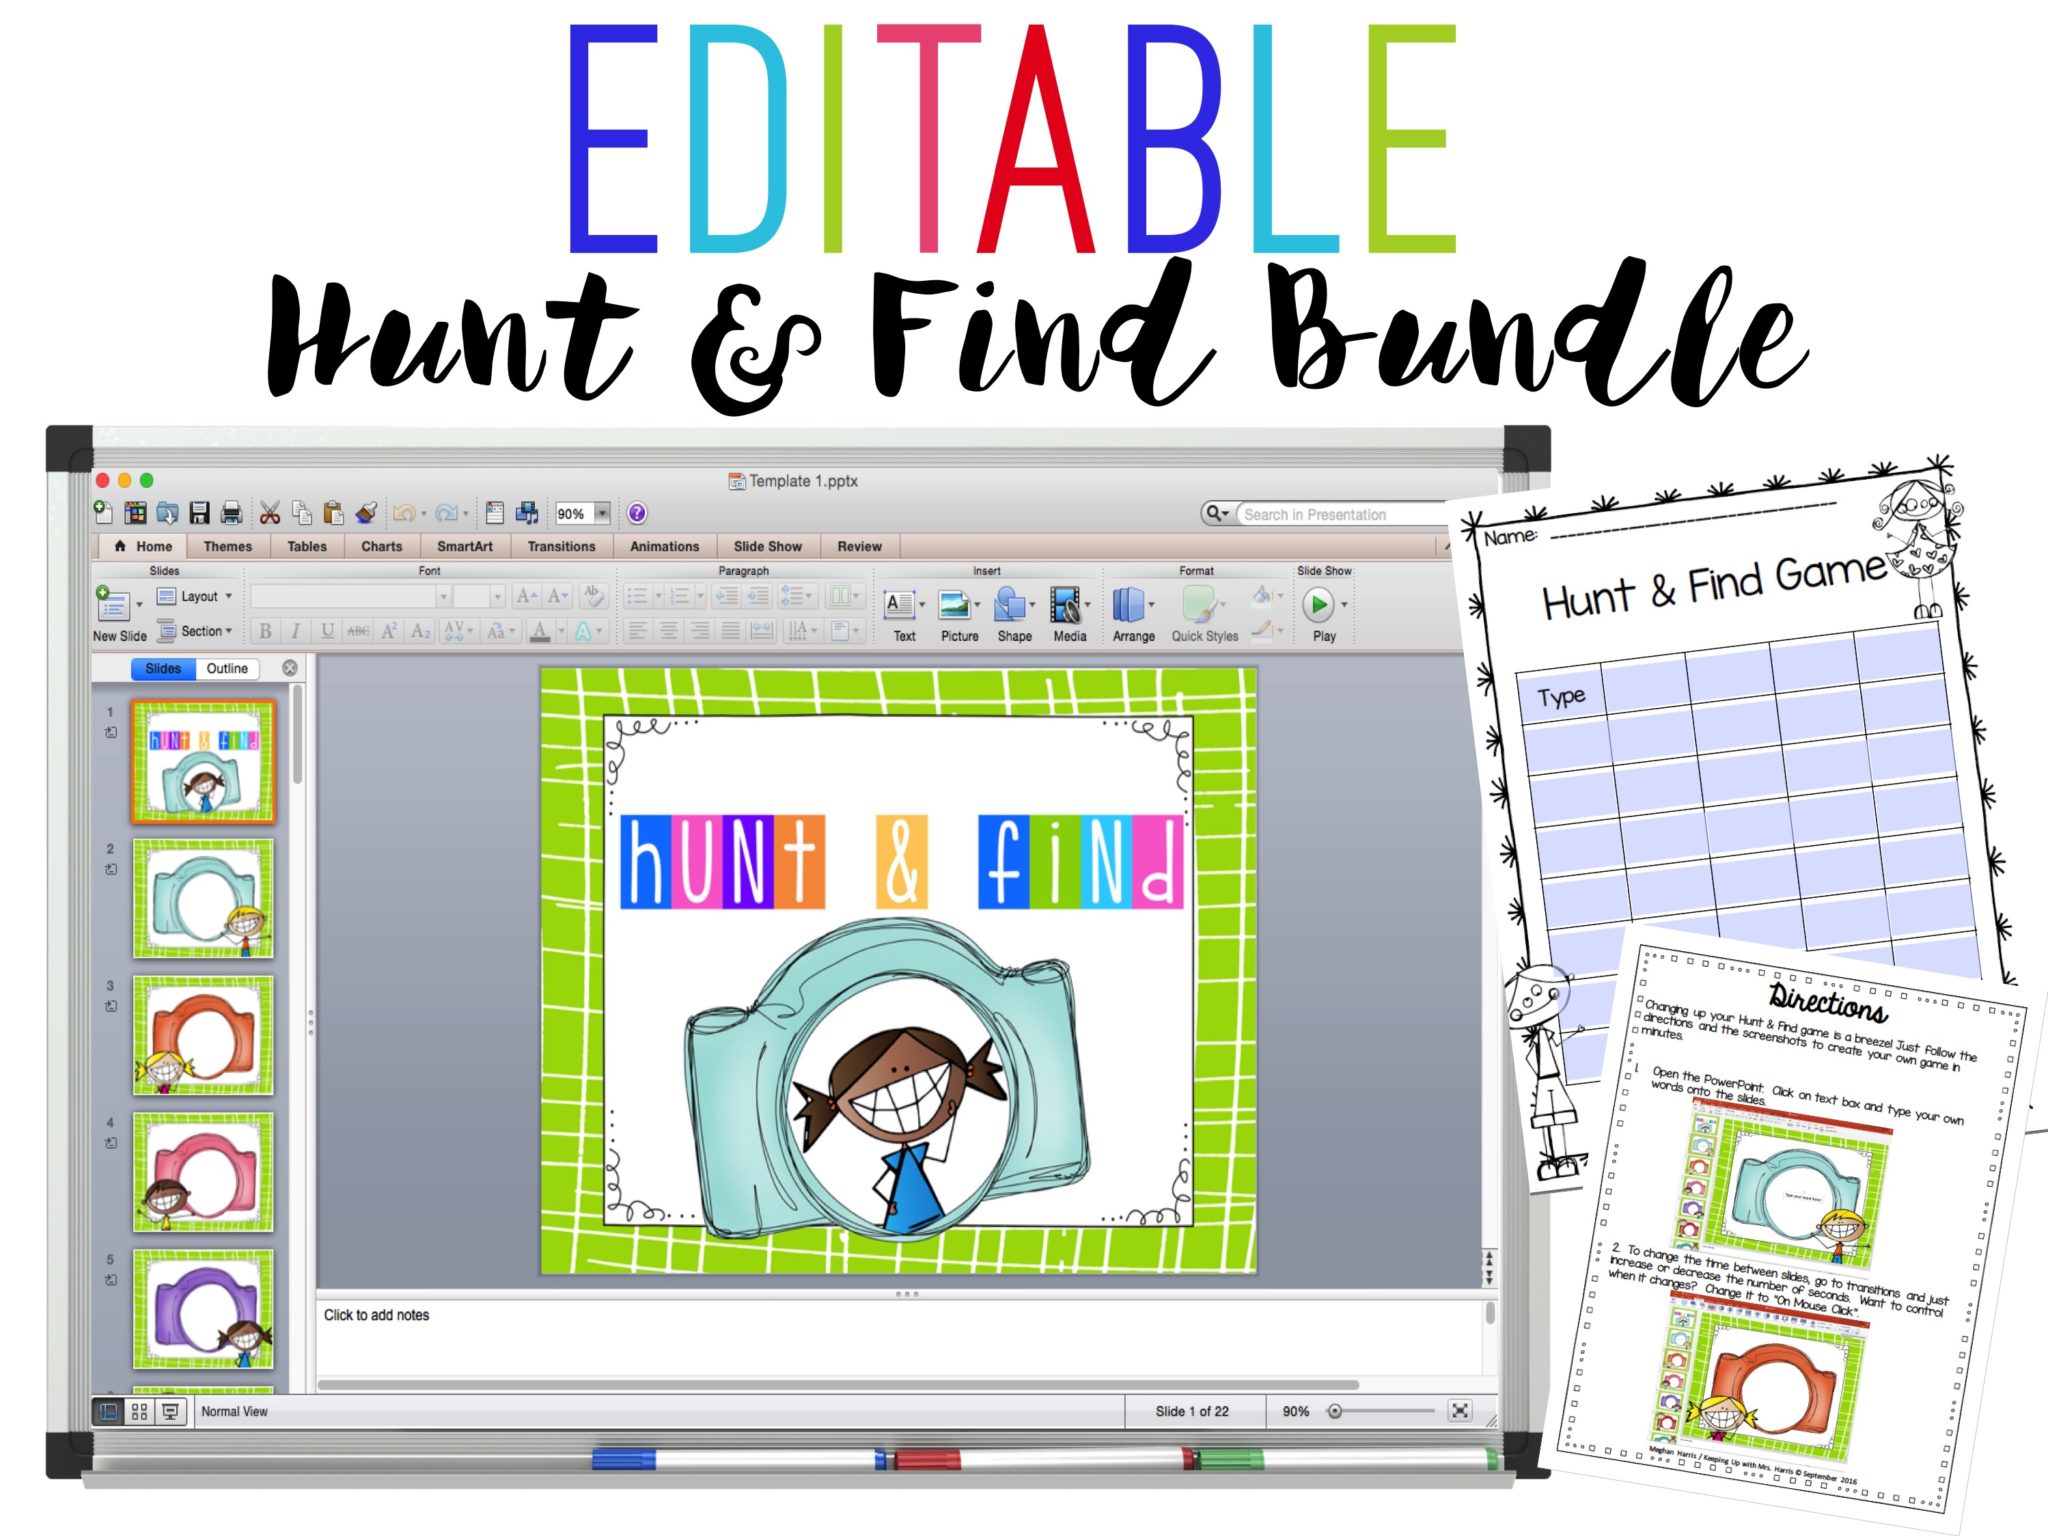 Hunt and Find Games - Editable templates so you can make your own games!